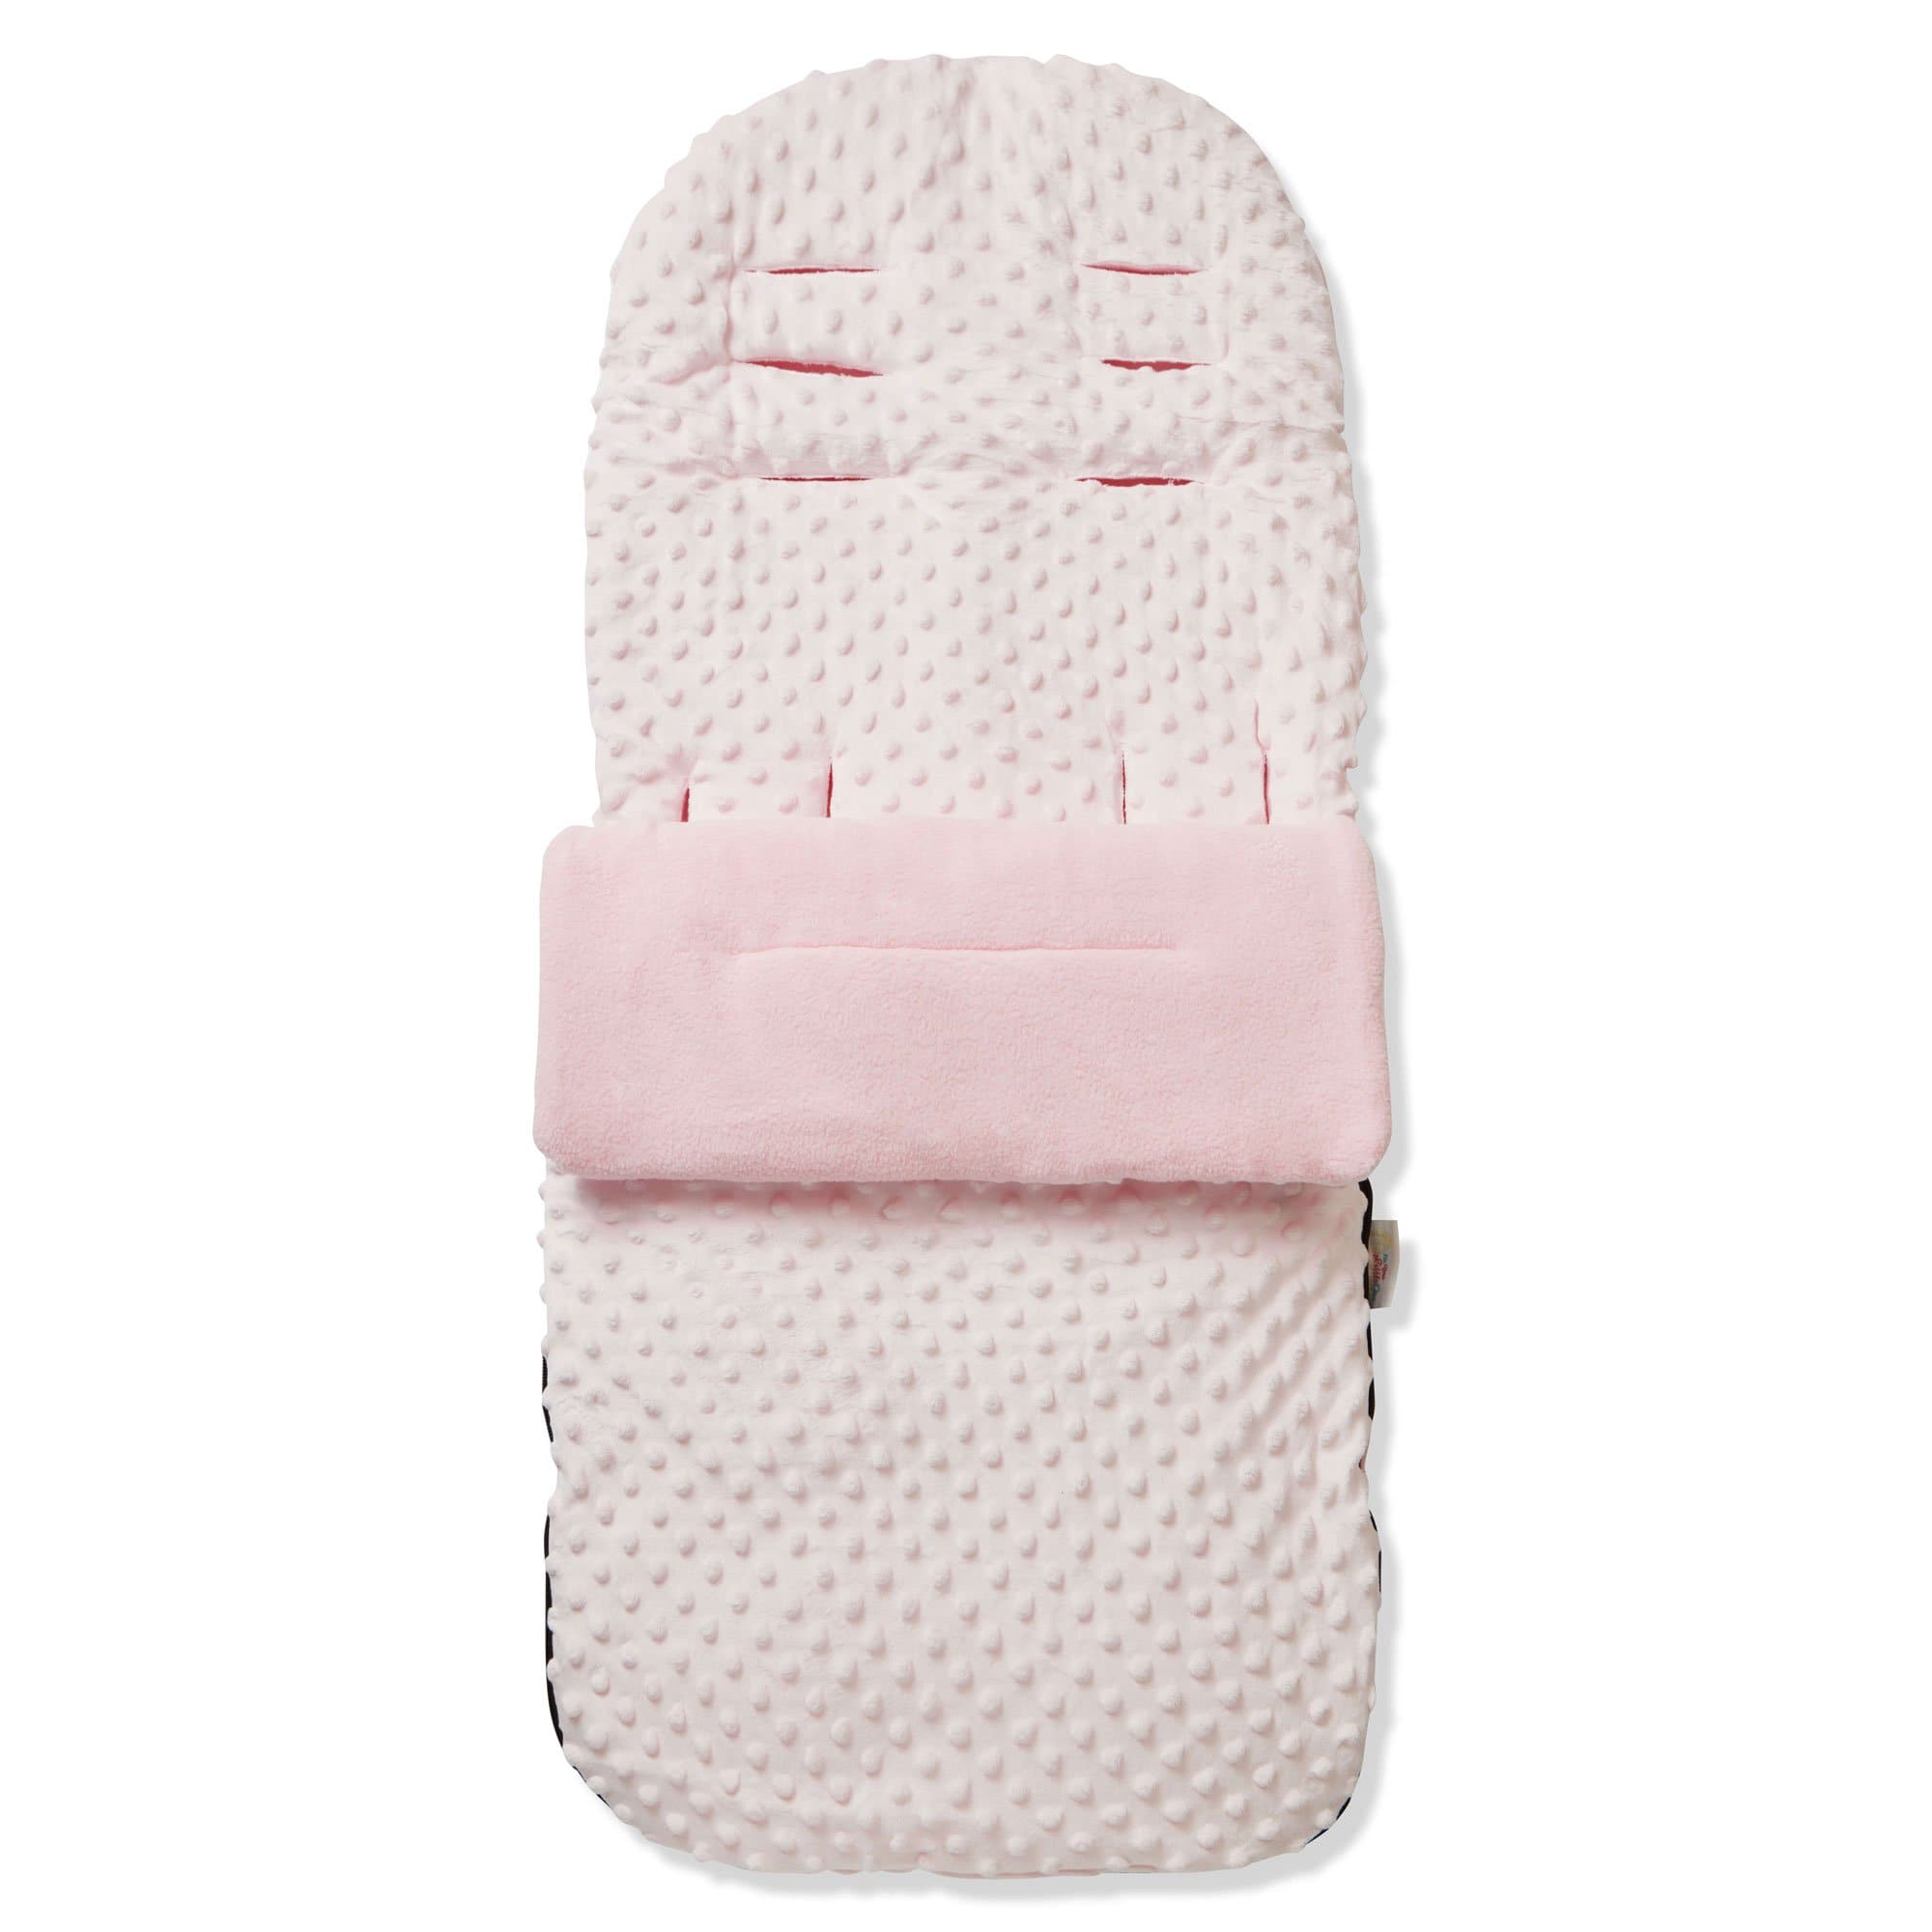 Dimple Footmuff / Cosy Toes Compatible with Mima - Pink / Fits All Models | For Your Little One